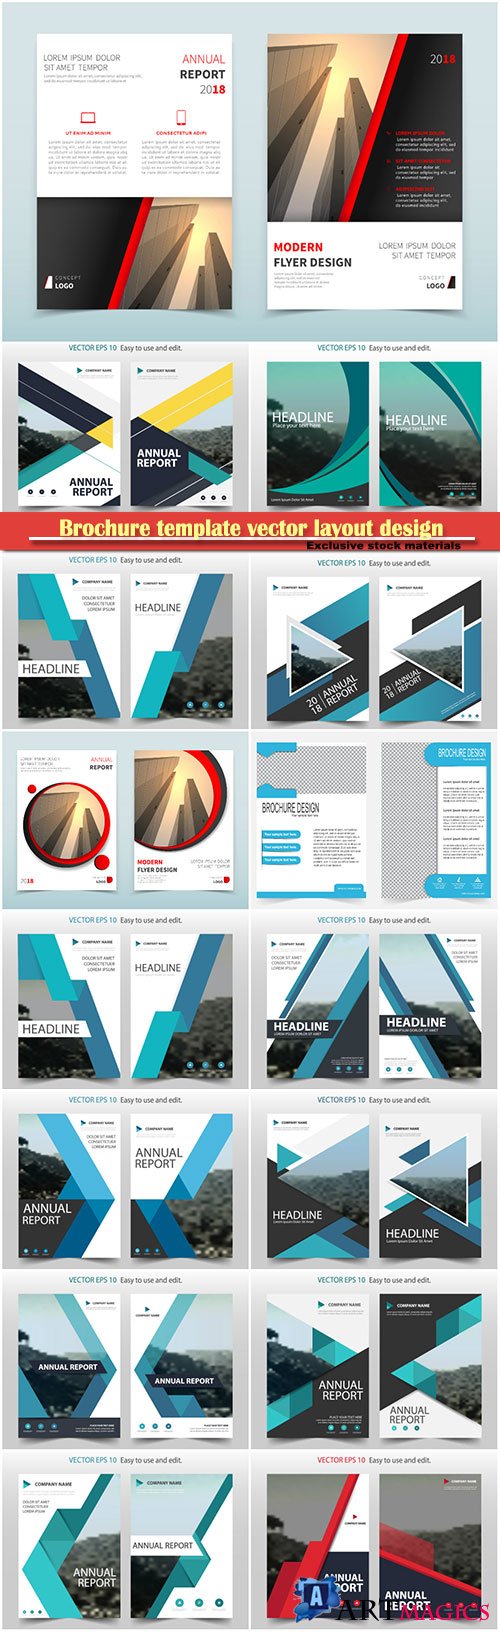 Brochure template vector layout design, corporate business annual report, magazine, flyer mockup # 112